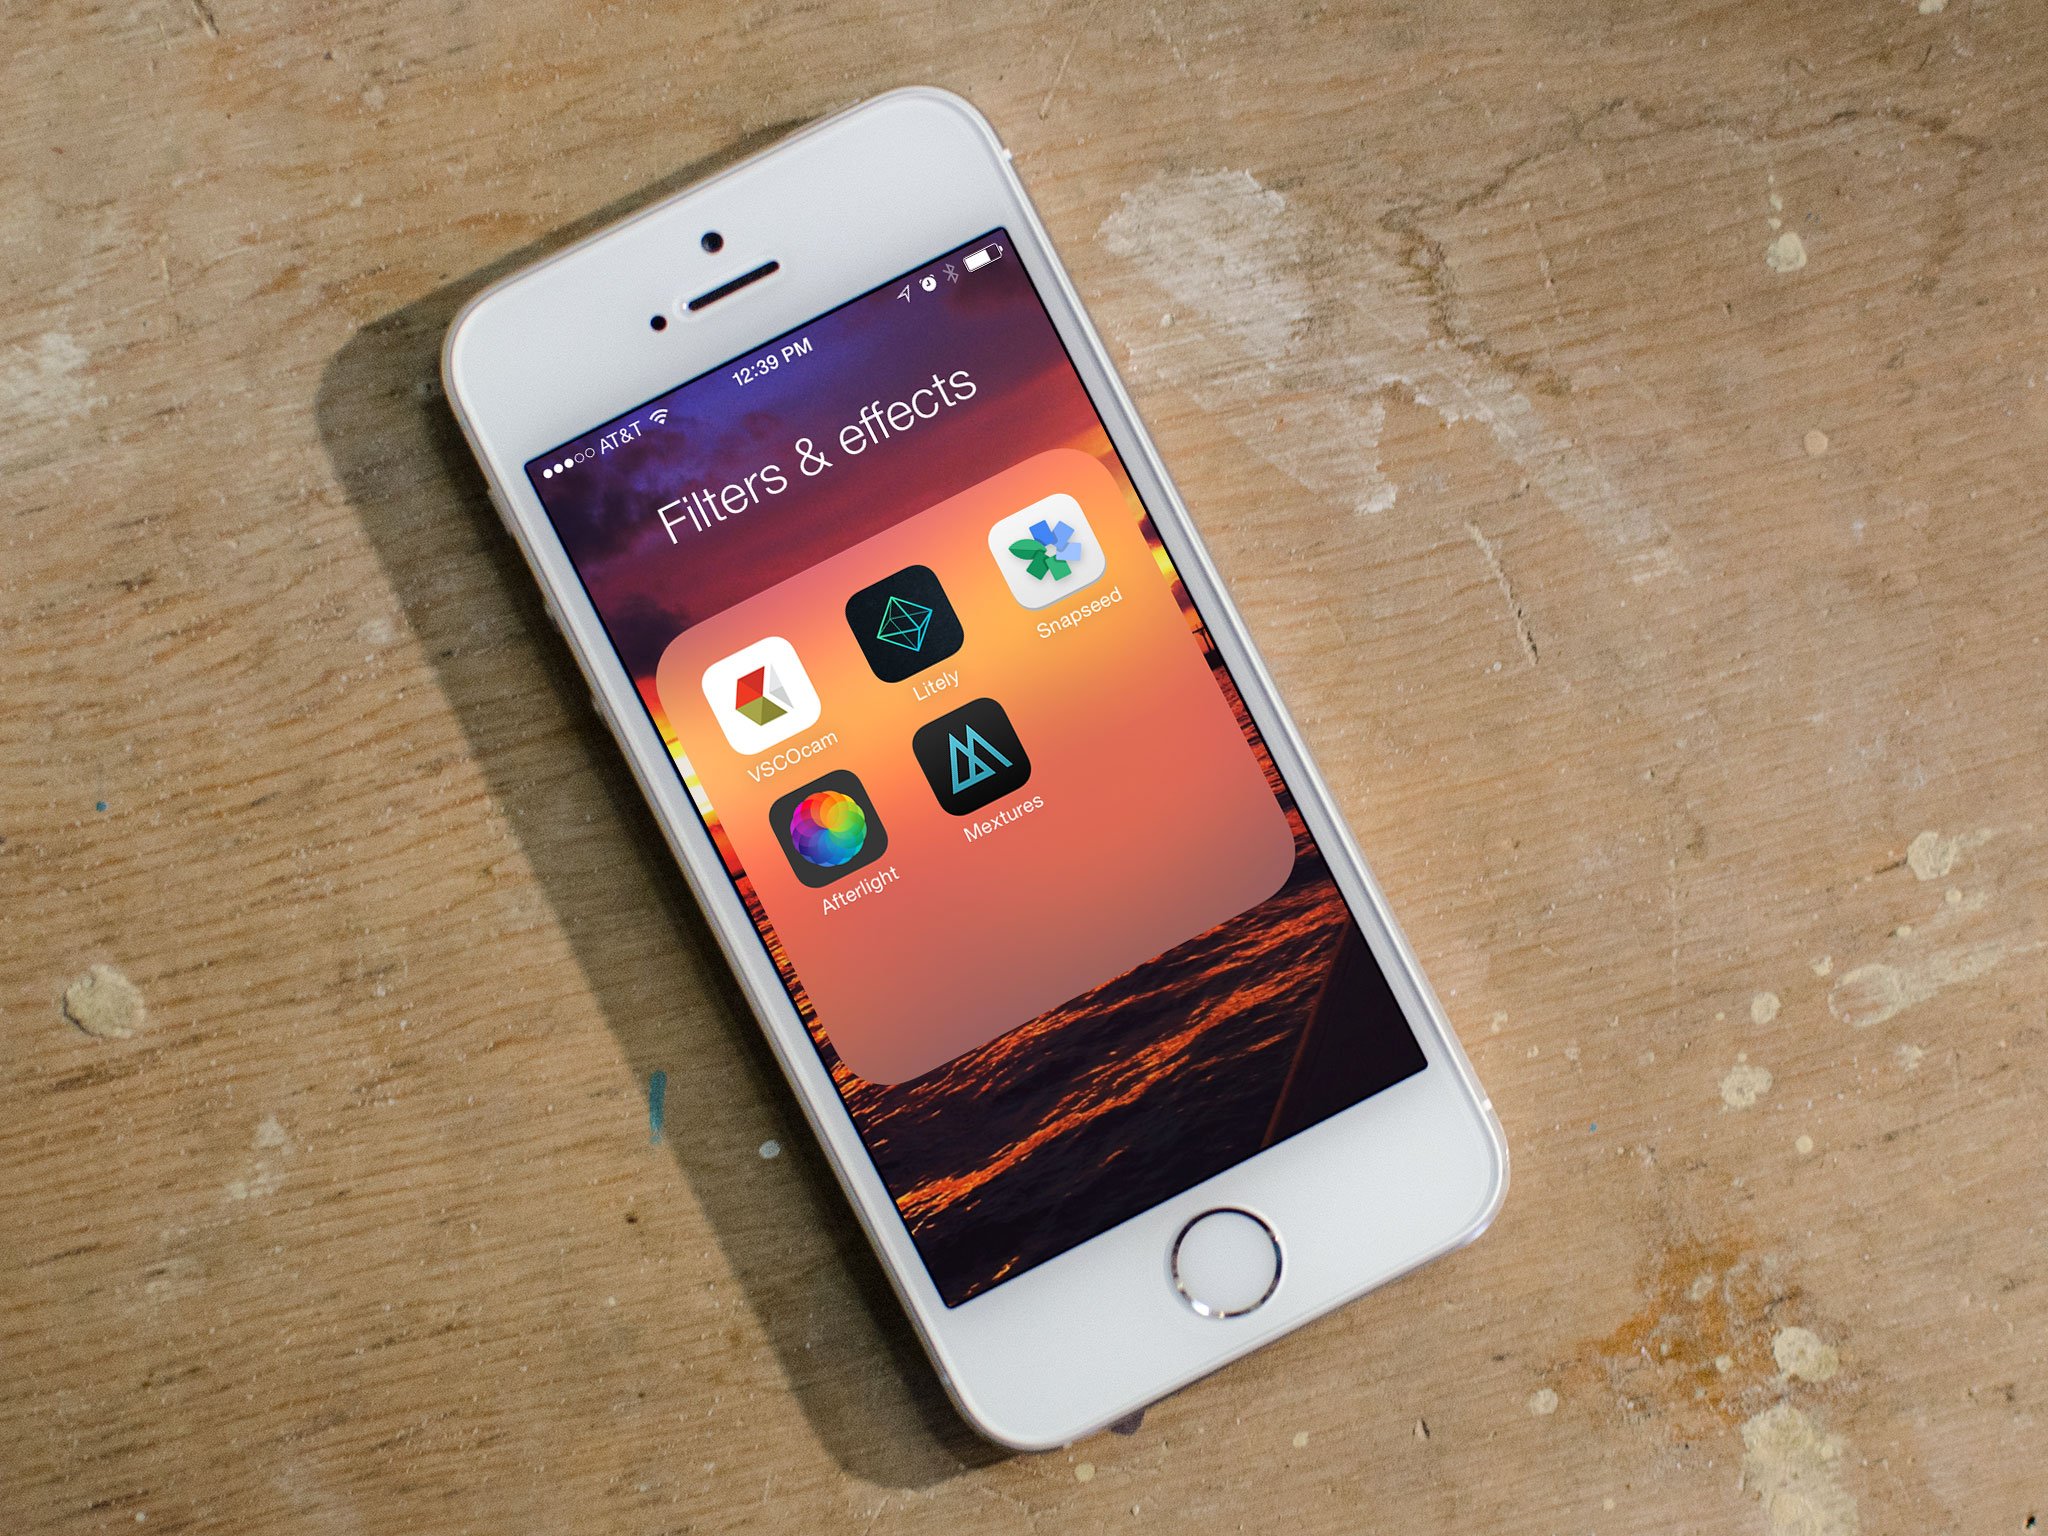 Best photo filter and effects apps for iPhone: Snapseed, Litely, Mextures, and more!